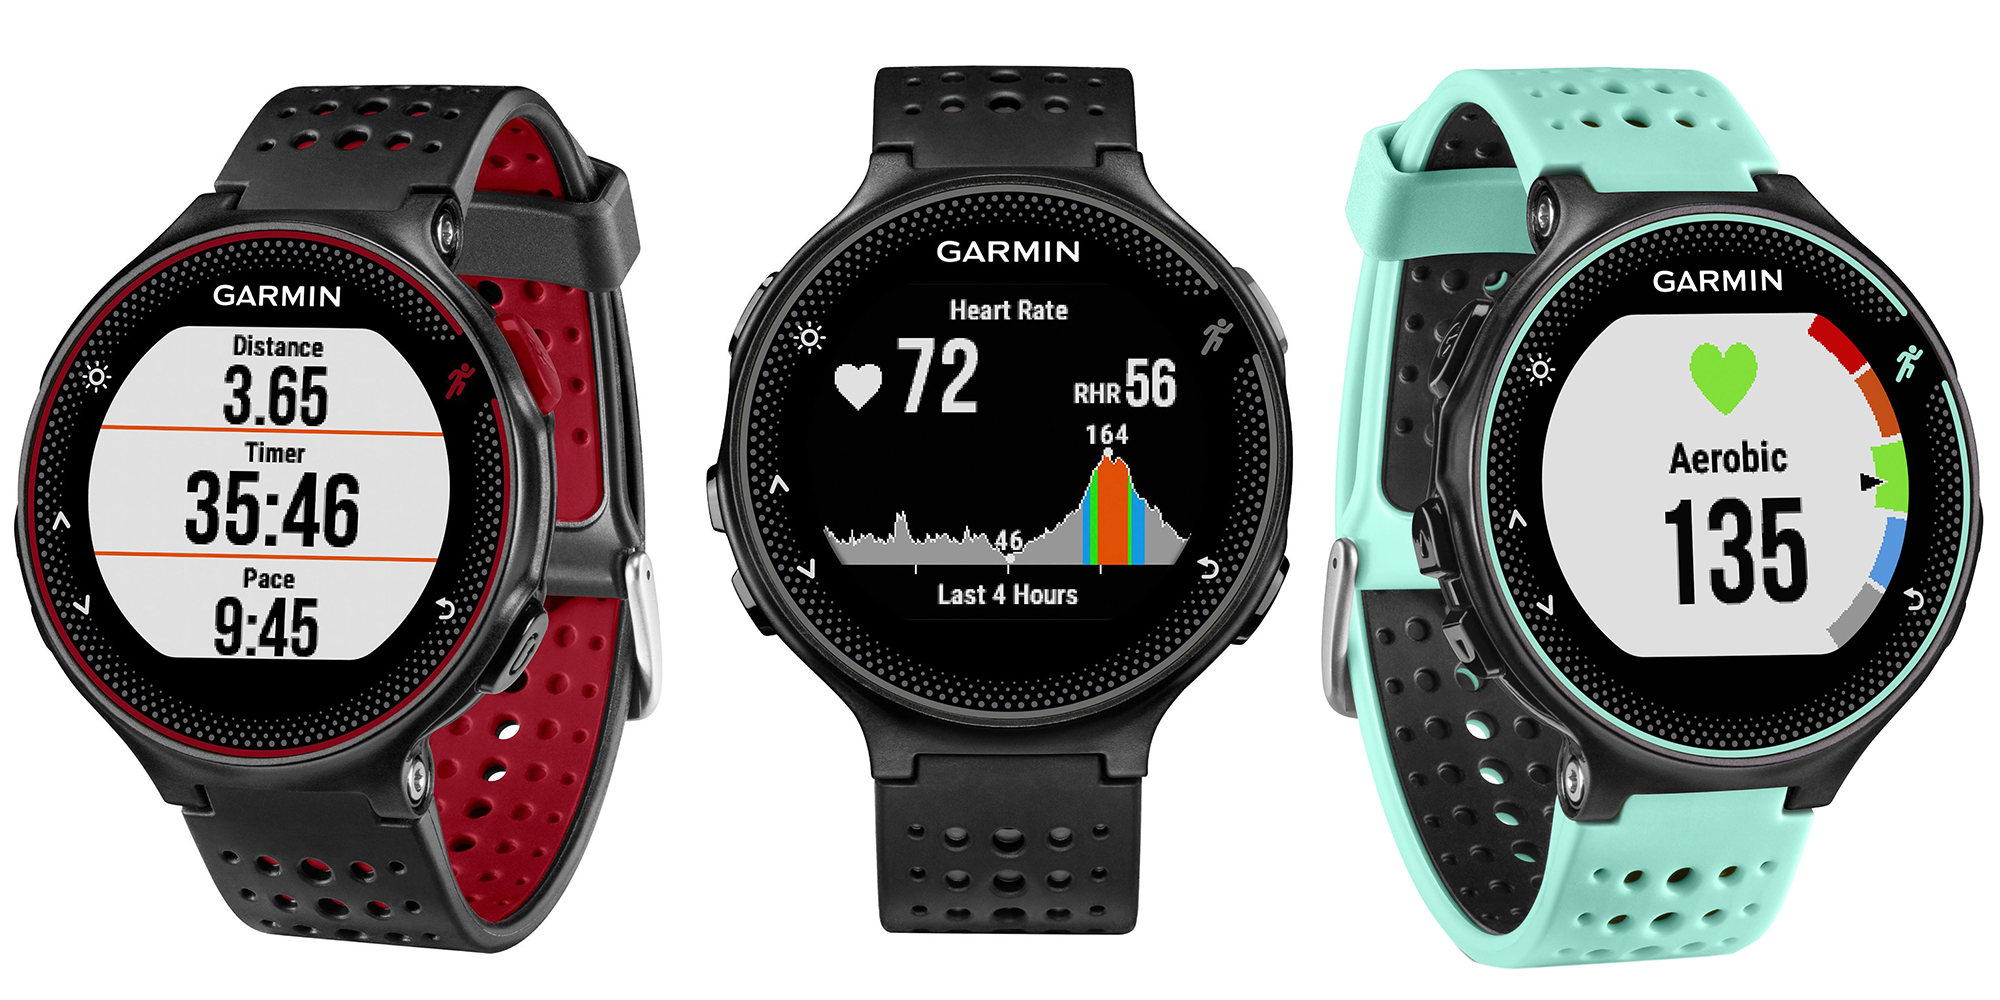 Start off 2017 with a new Garmin Forerunner 235 GPS Smartwatch for iOS + Android: $240 shipped 